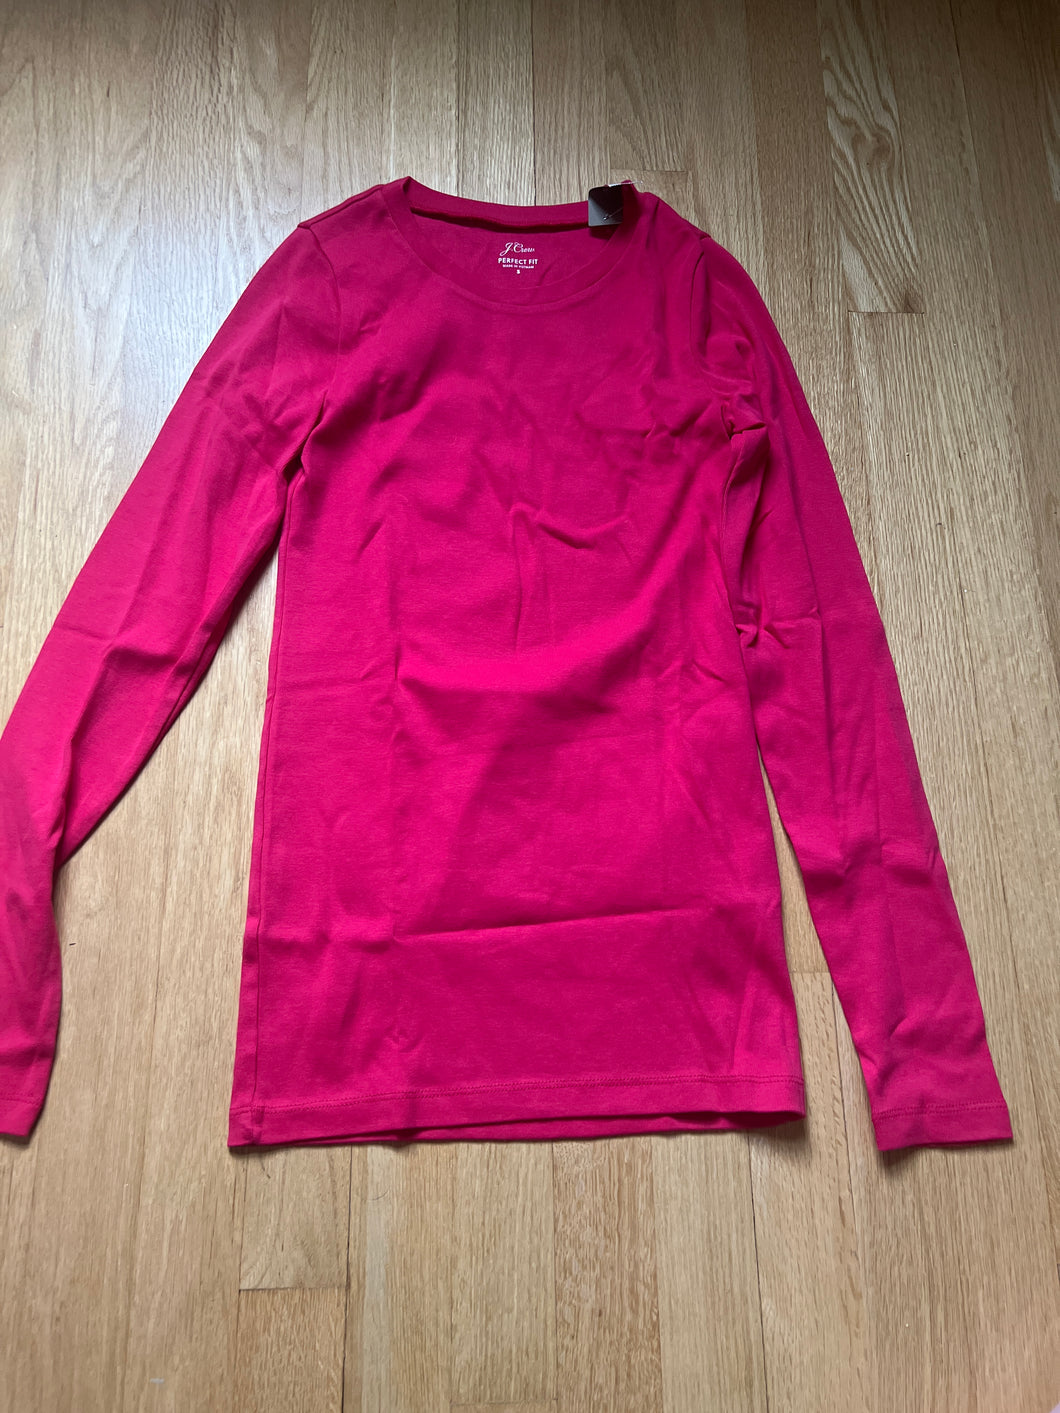 J Crew pink long sleeve shirt- perfect Fit shirt Adult Small